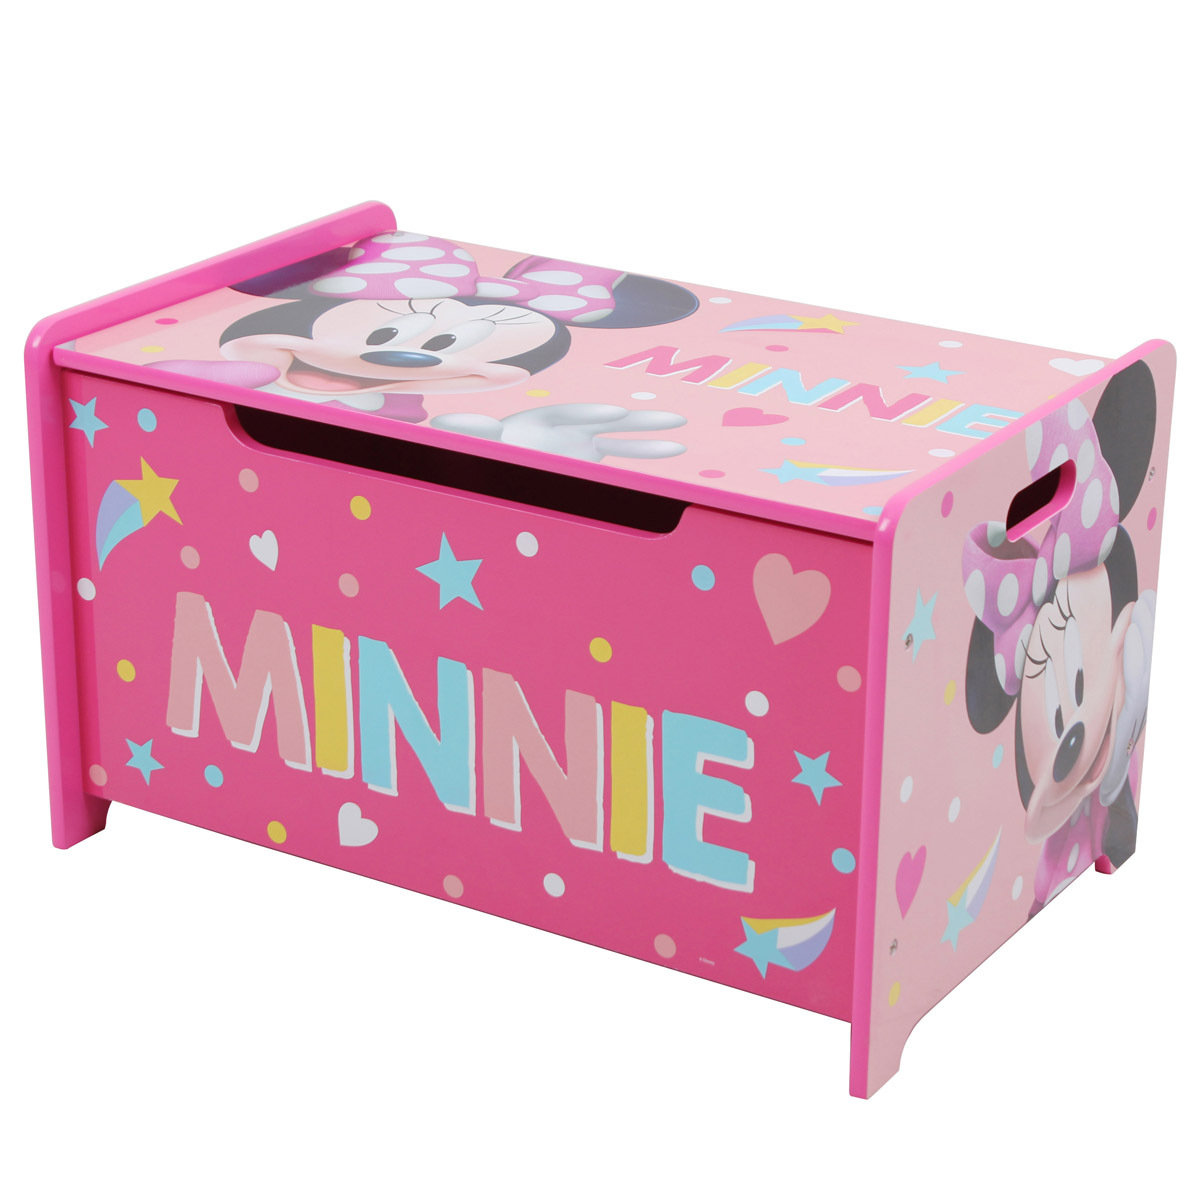 Minnie Mouse Deluxe Wooden Toy Box and Bench | Early Learning Centre